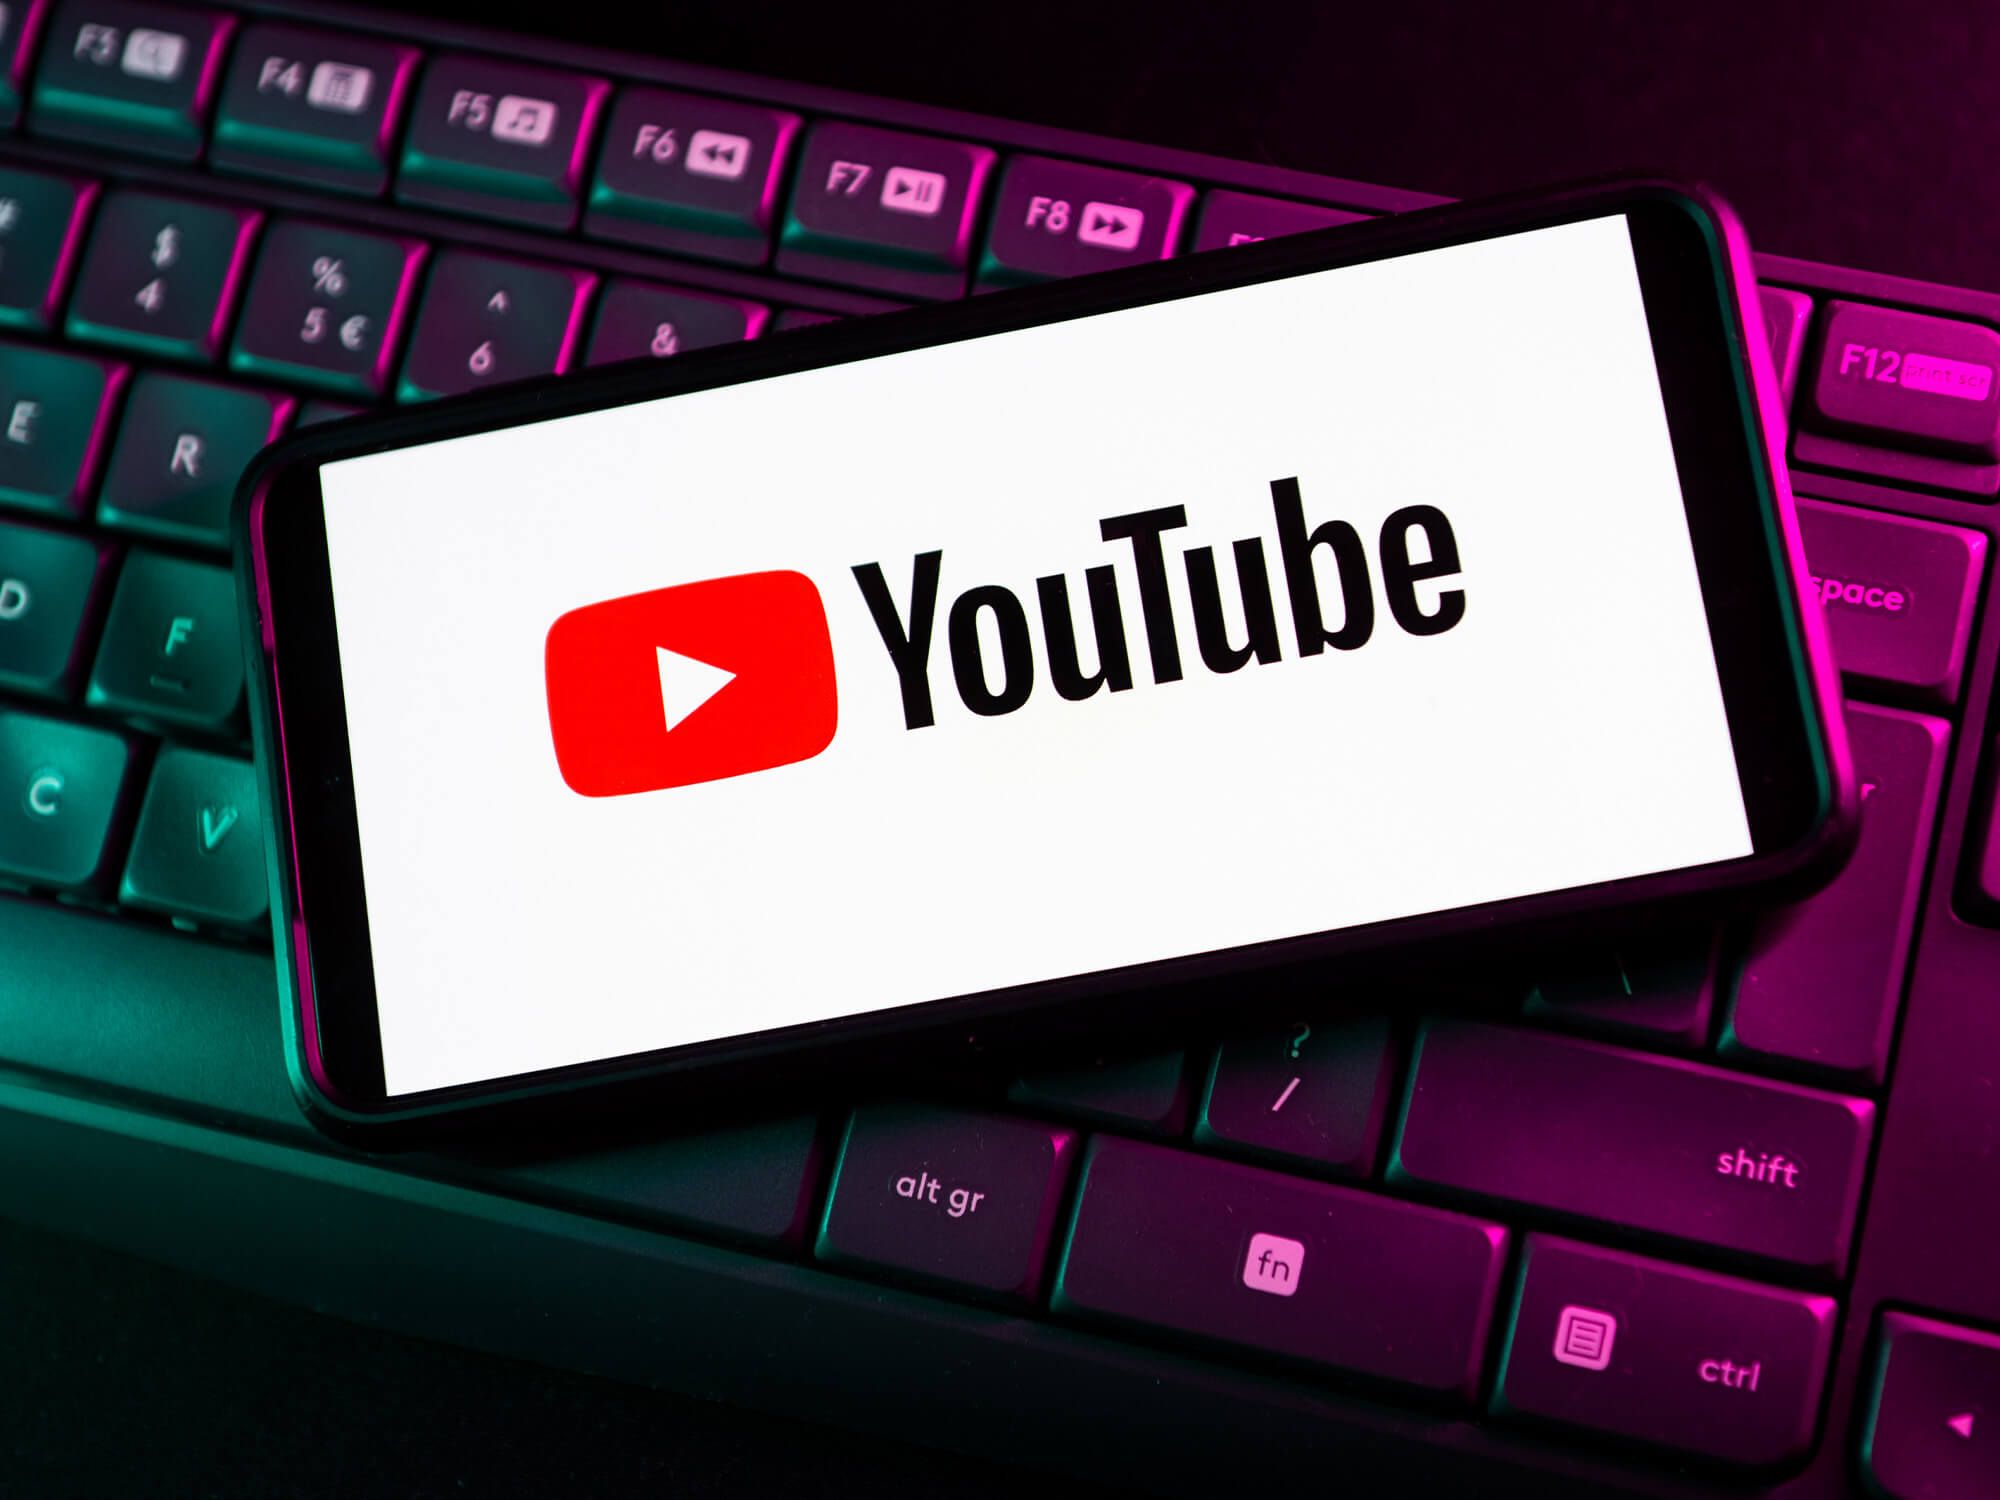 YouTube logo on a phone screen, which rests on top of a black keyboard. There is pink lighting over the keyboard.